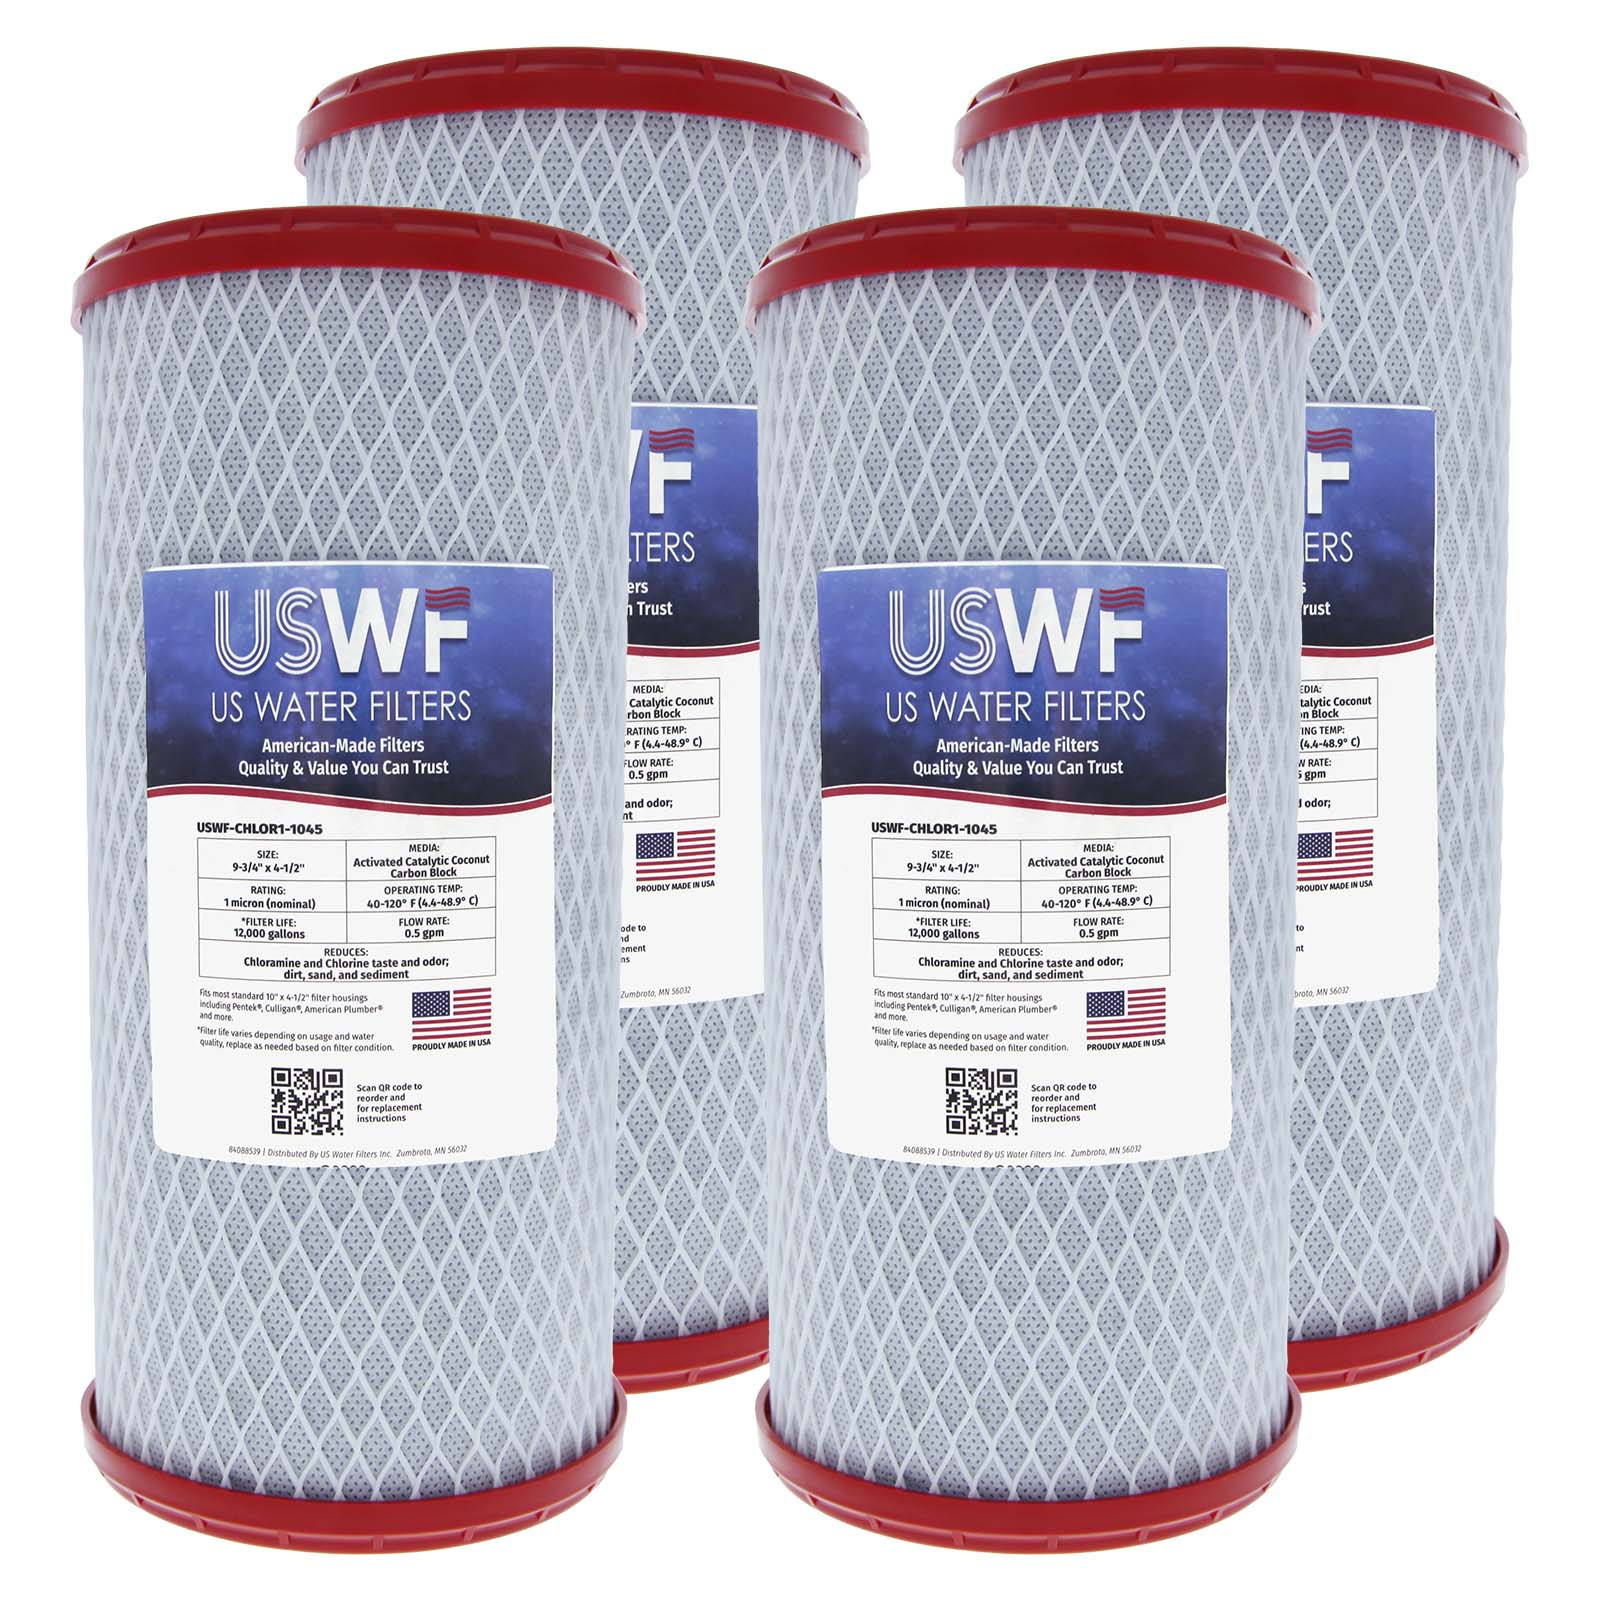 Chloramine Reducing Filter by USWF Catalytic Carbon Block 1 Micron 10"x4.5"